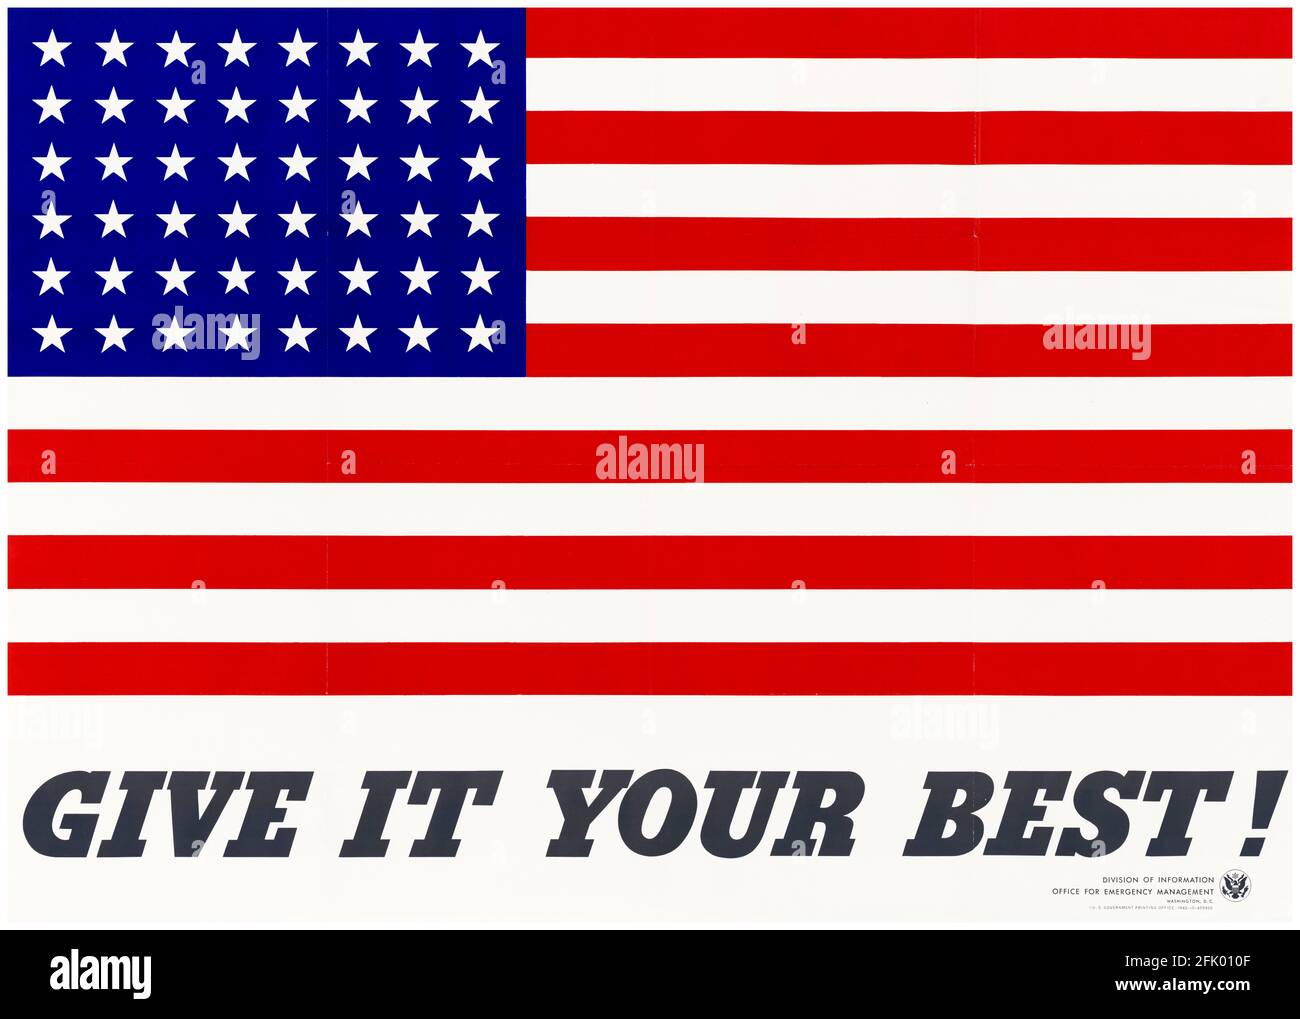 American, WW2 Motivational Poster, Give it Your Best!,(Stars and Stripes Flag), 1942-1945 Stockfoto